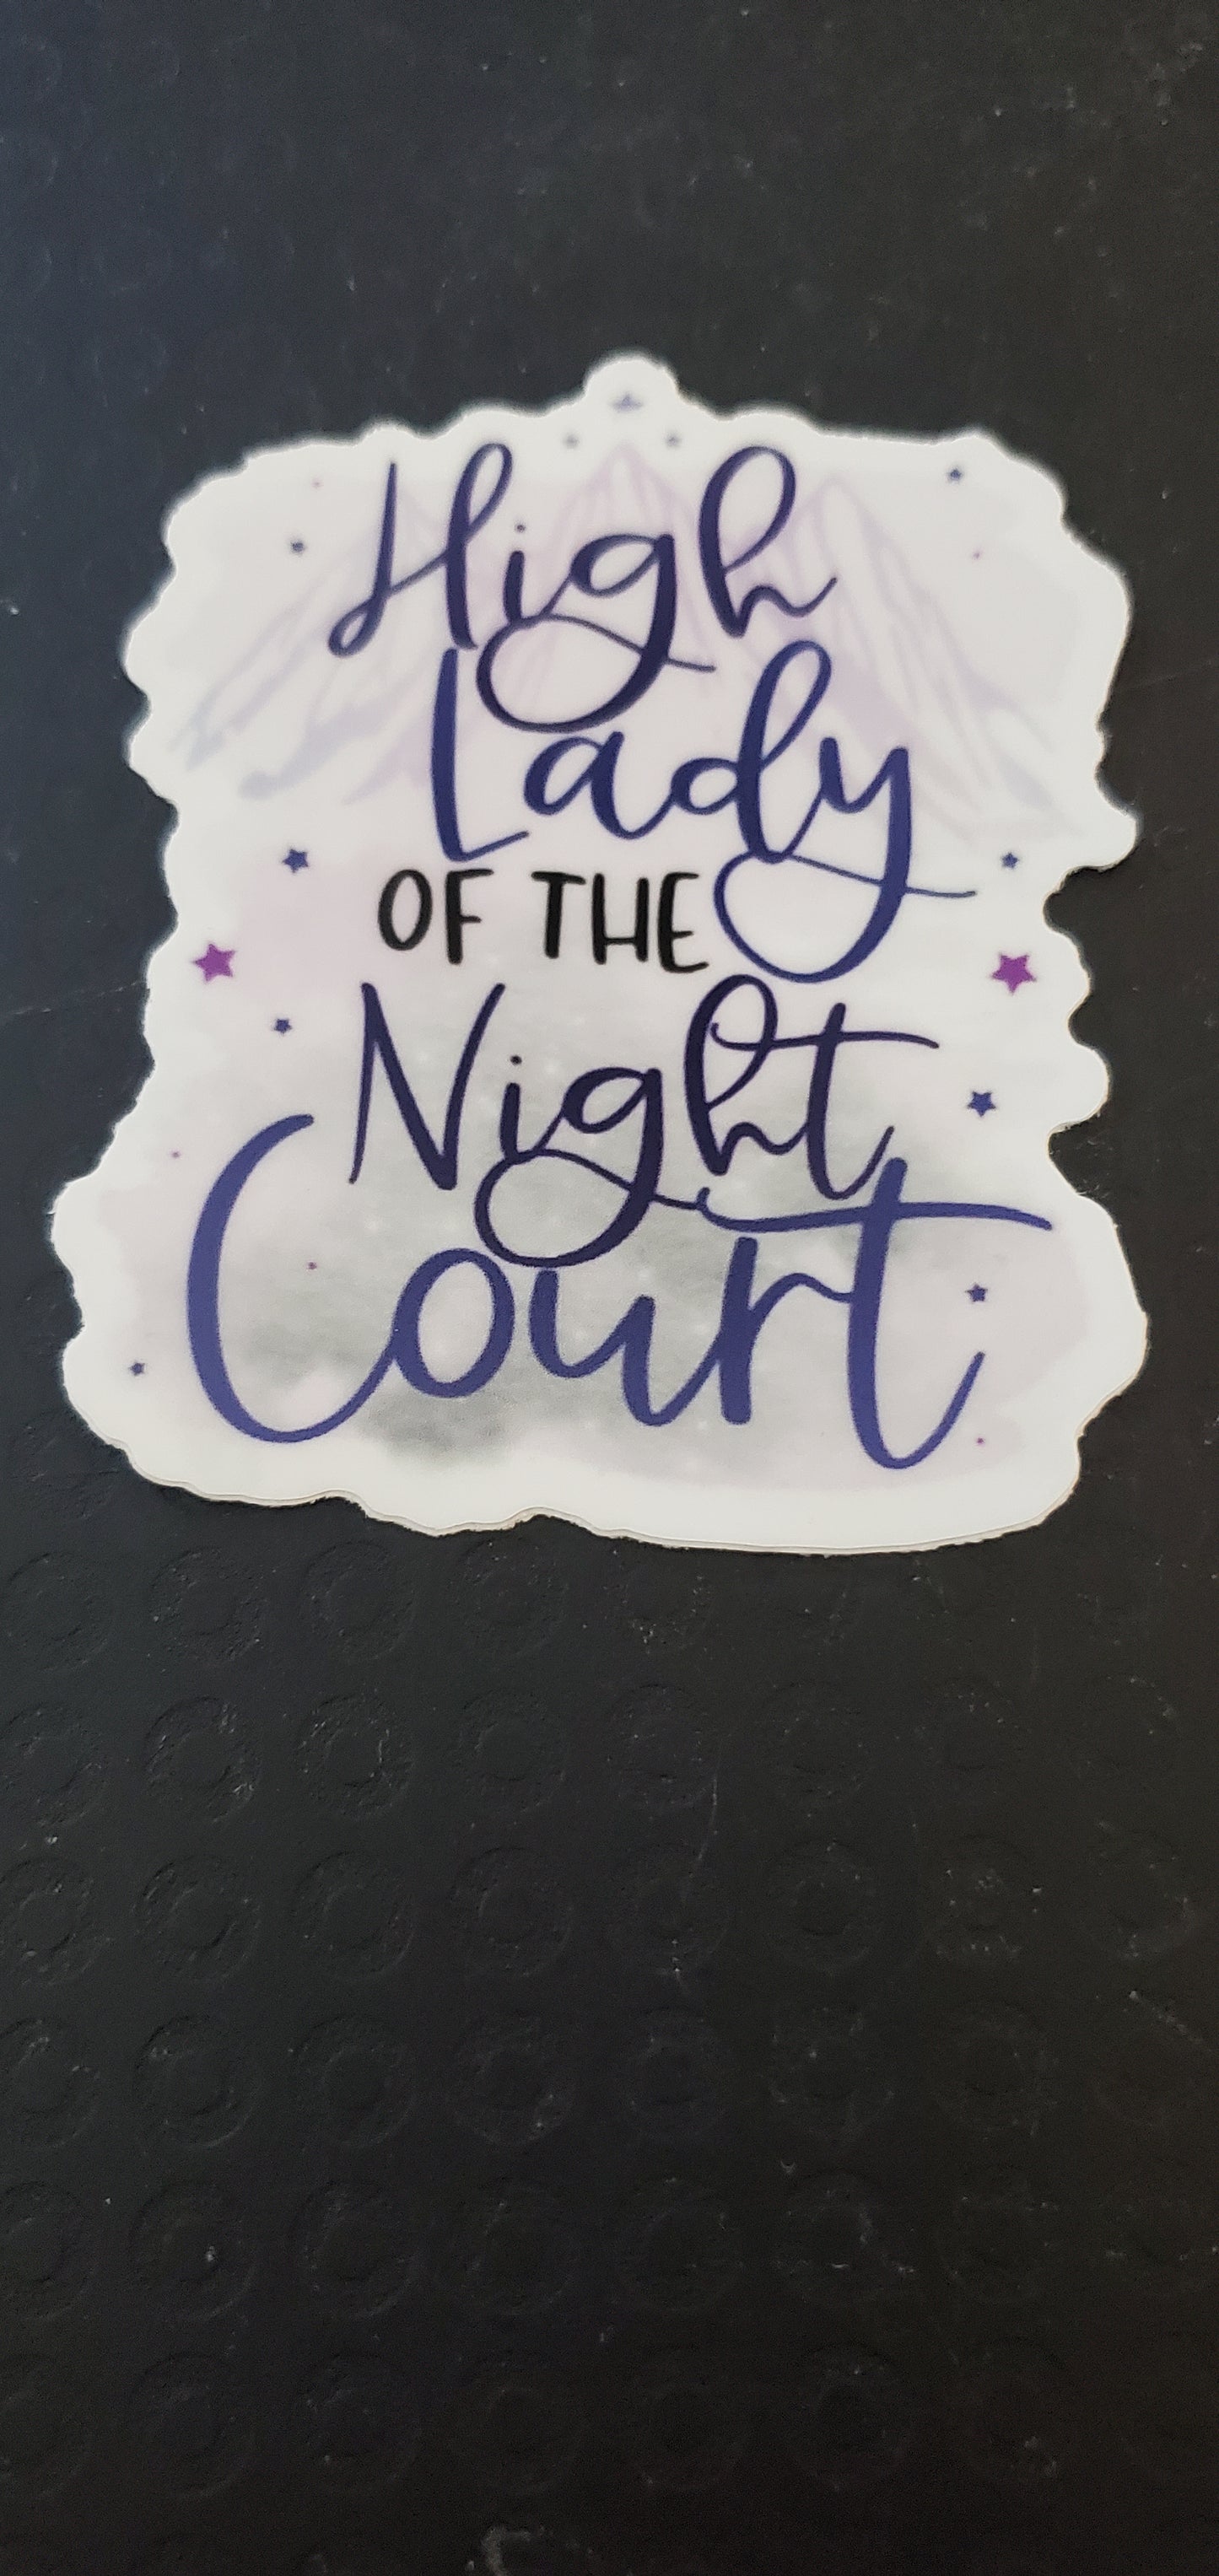 High Lady of the Night Court Vinyl Decal Sticker